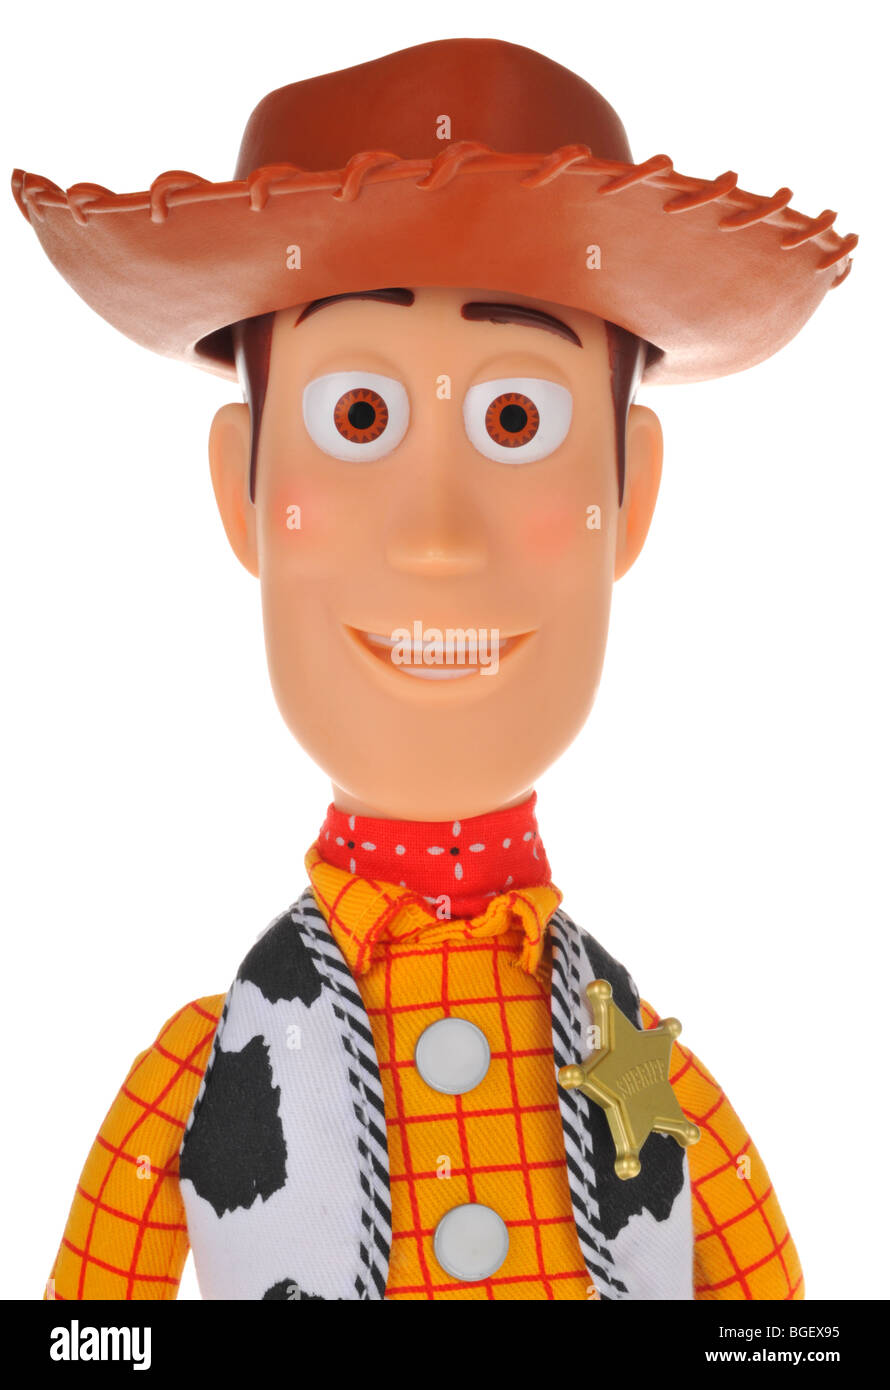 Woody cowboy figure from the film "Toy Story Stock Photo: 27372833 ...